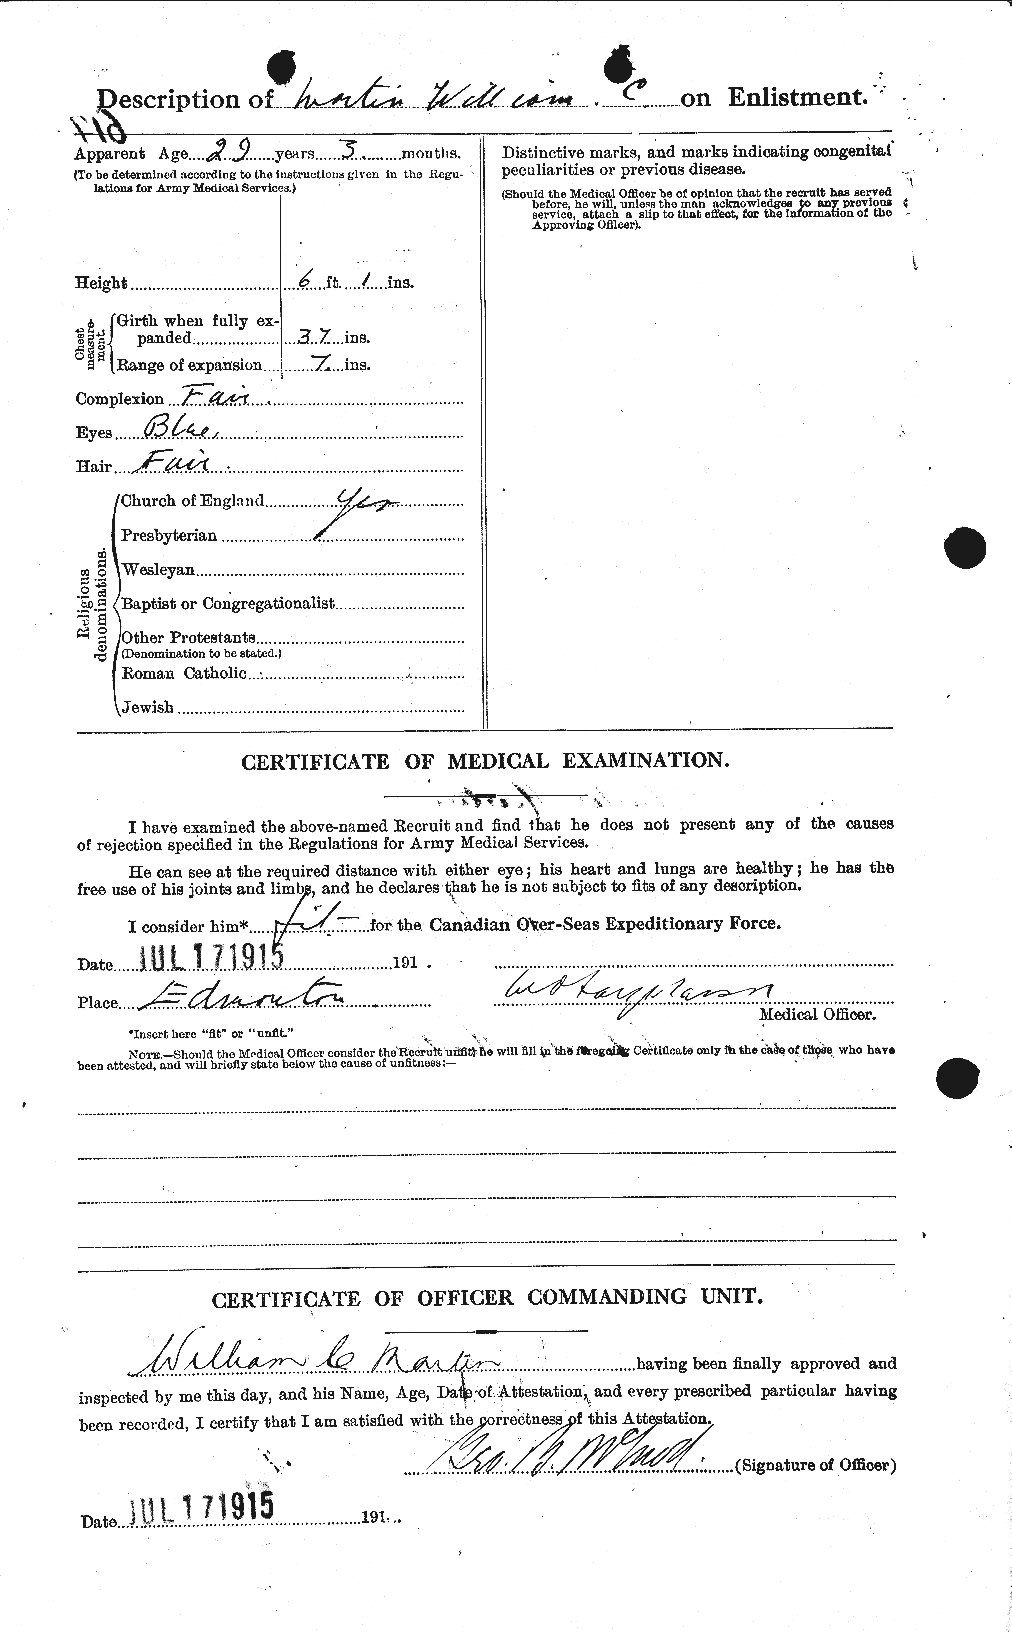 Personnel Records of the First World War - CEF 485751b